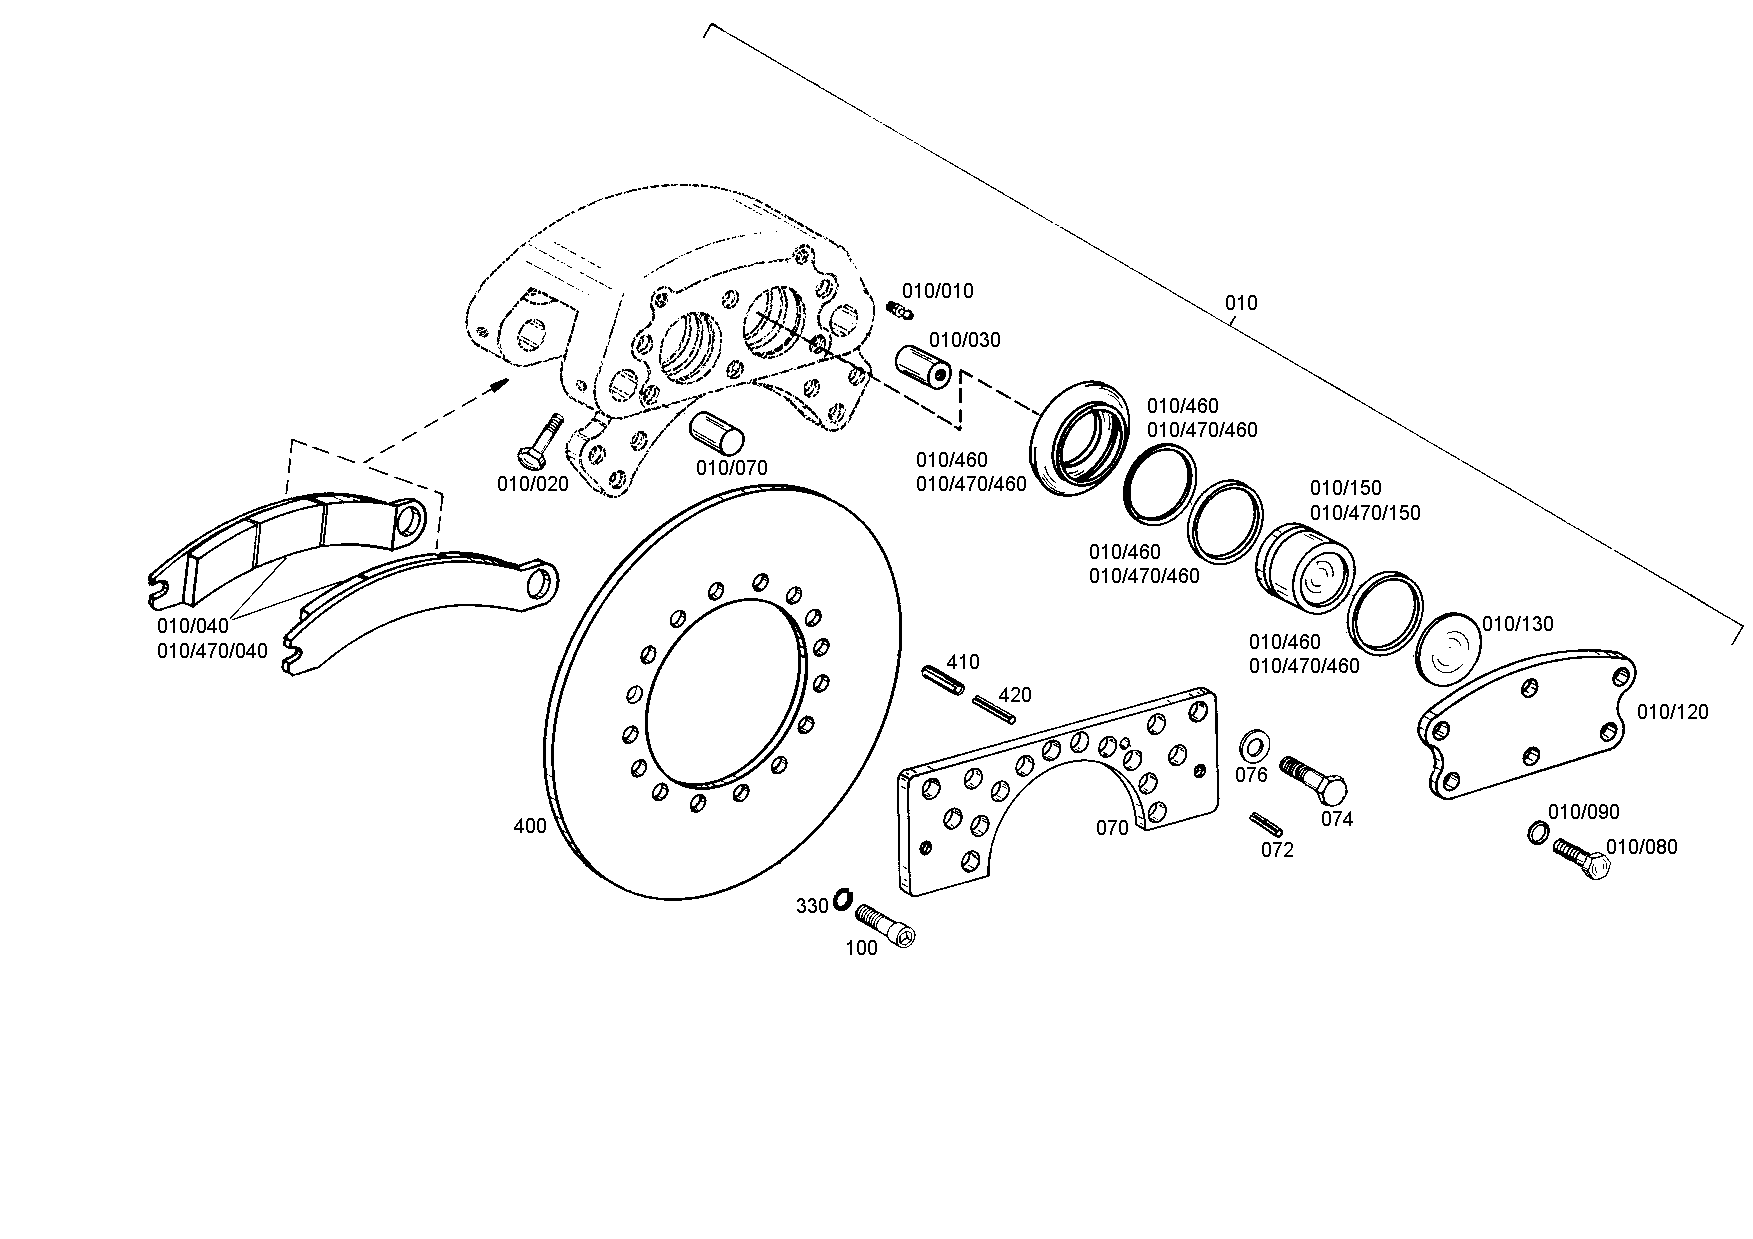 drawing for CARROCERIAS AYATS 32002362 - WASHER (figure 5)